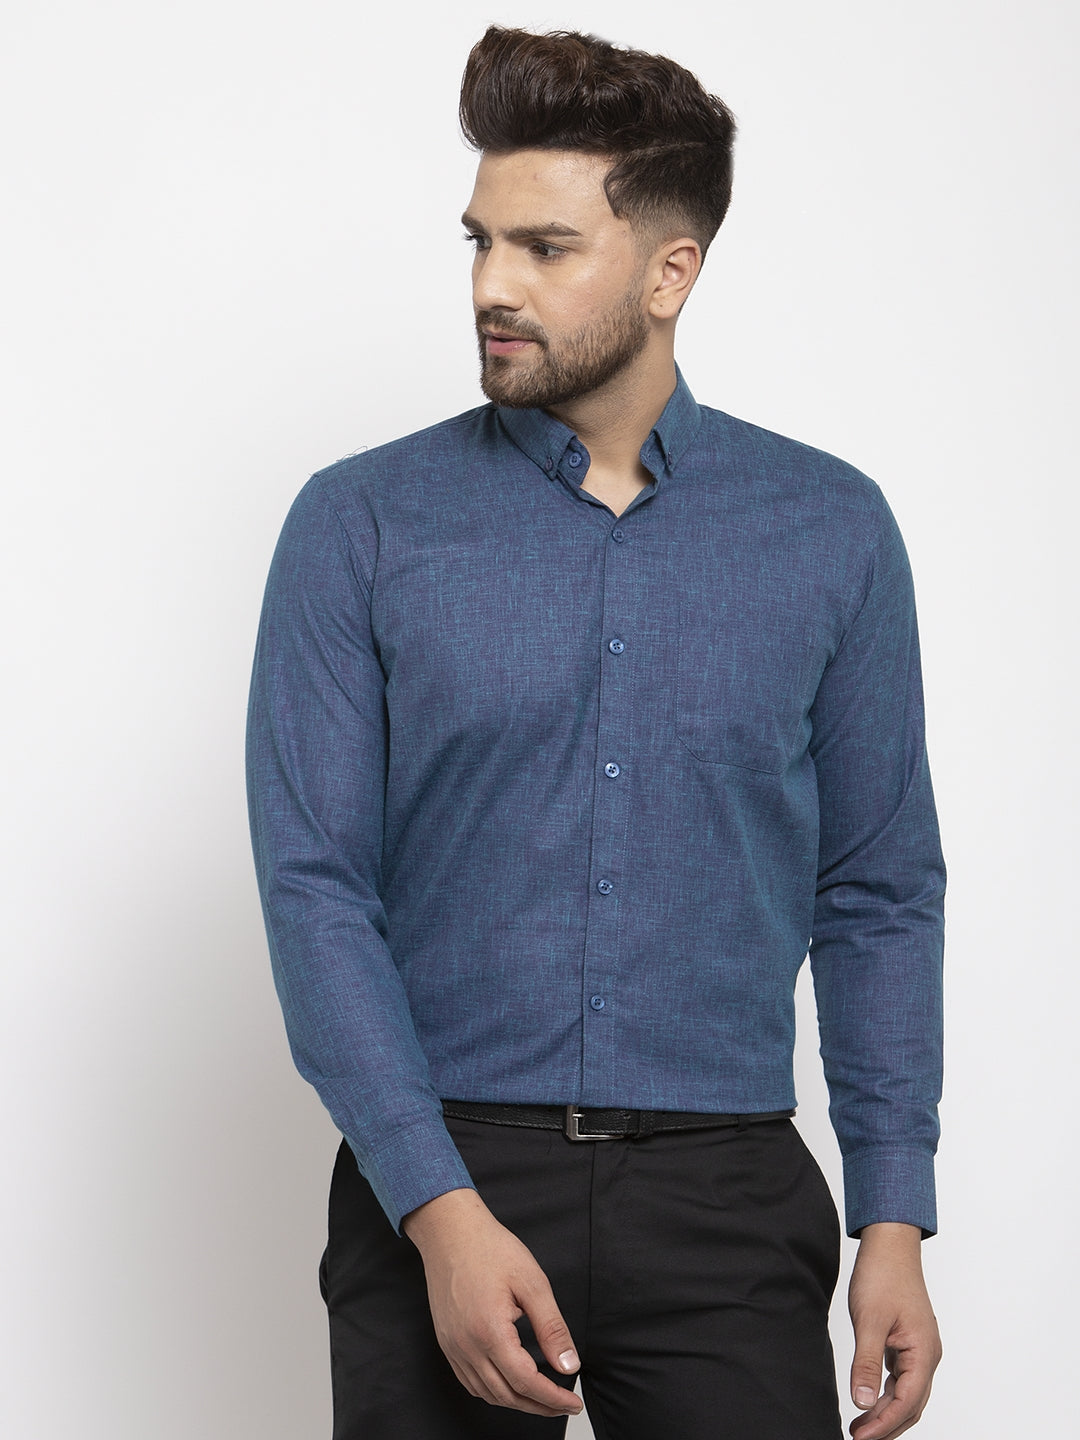 Men's Blue Cotton Solid Button Down Formal Shirts ( SF 753Teal ) - Jainish